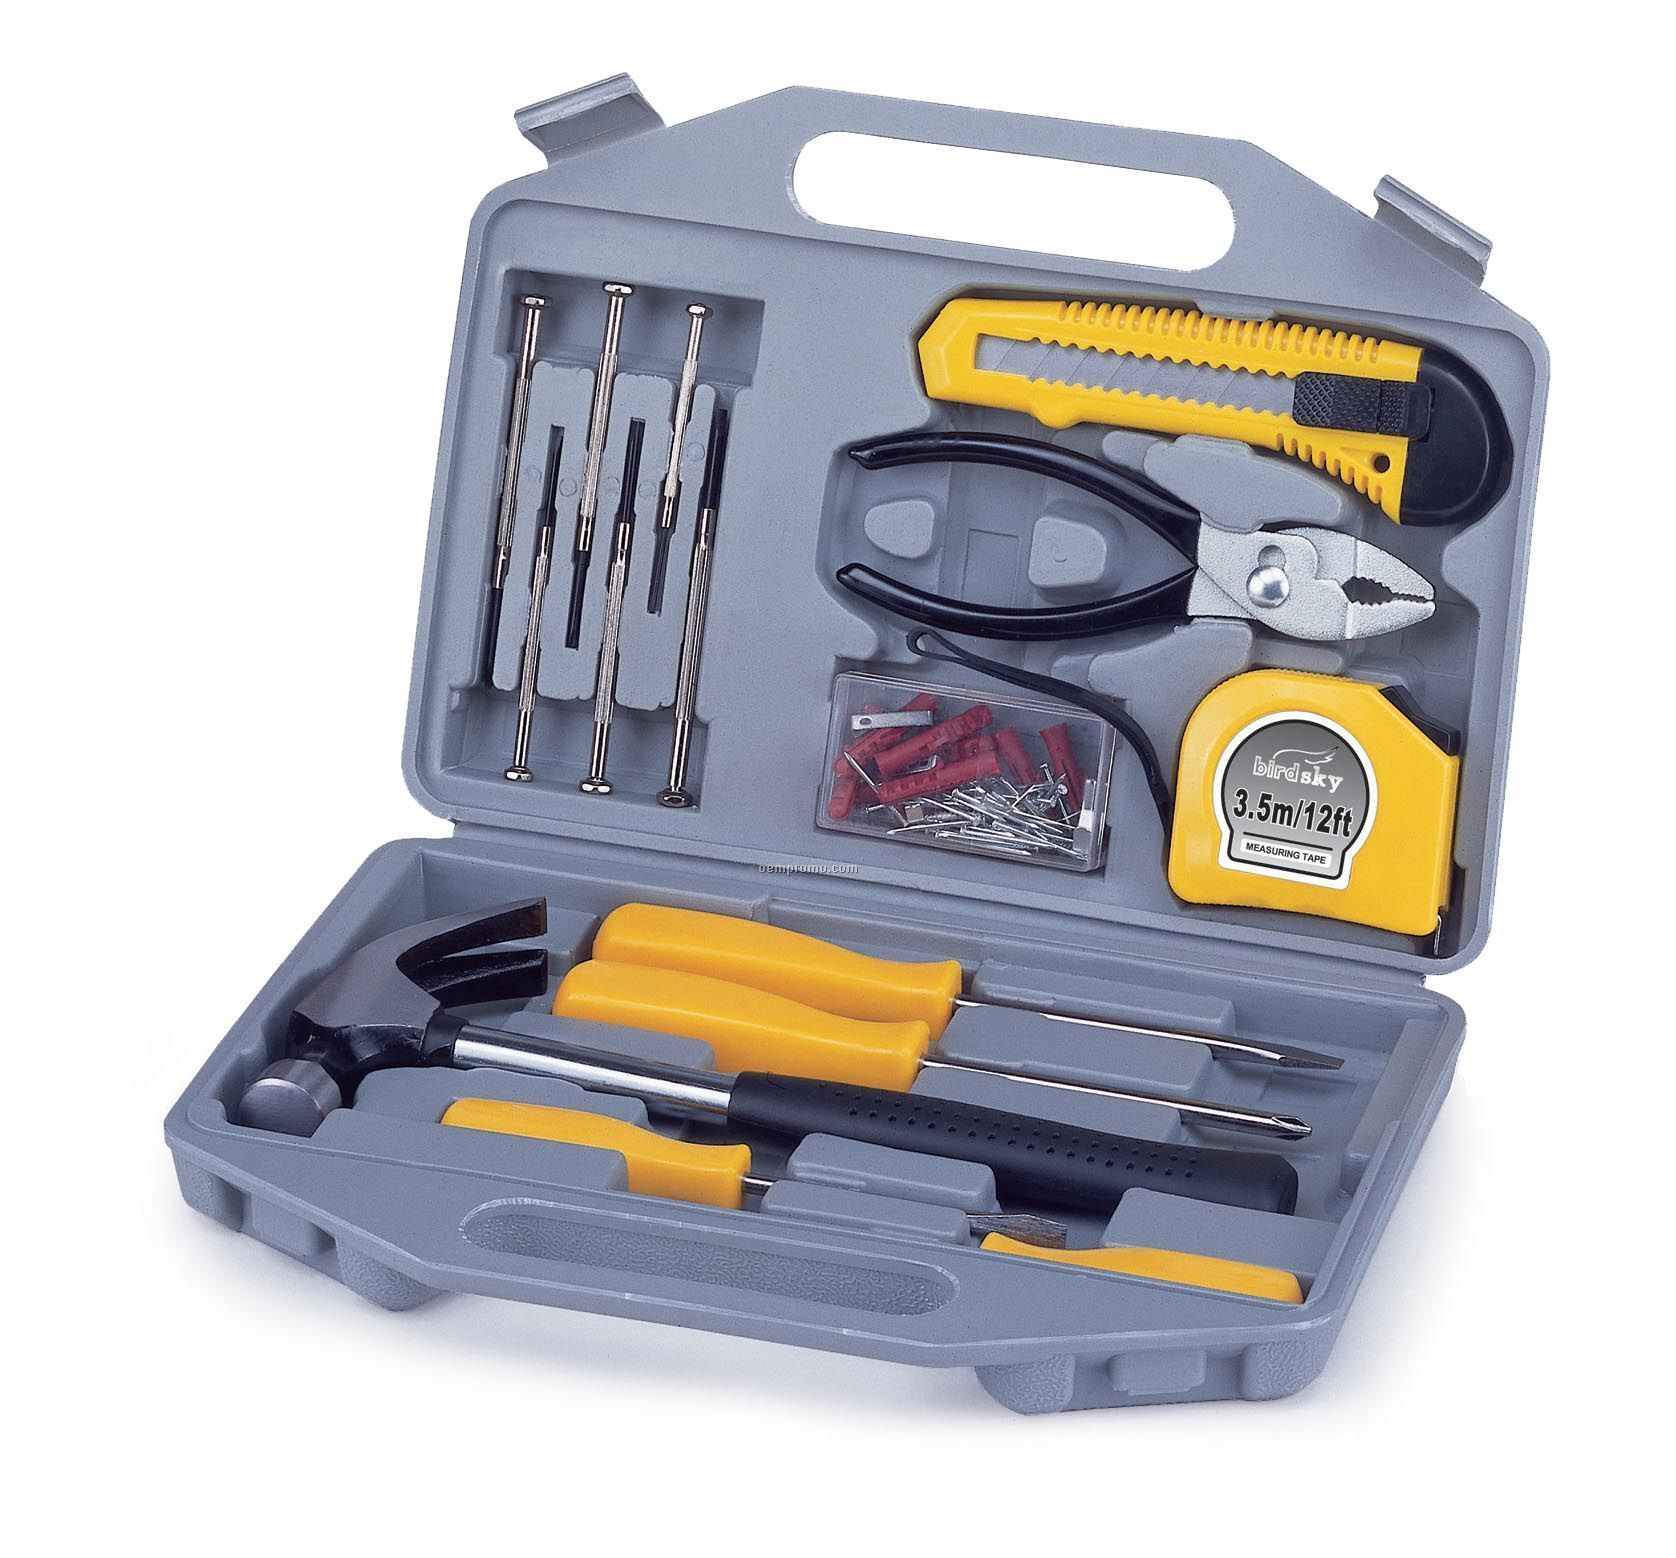 Essentials Tool Kit W/ Molded Carrying Case (Yellow & Black Handles)